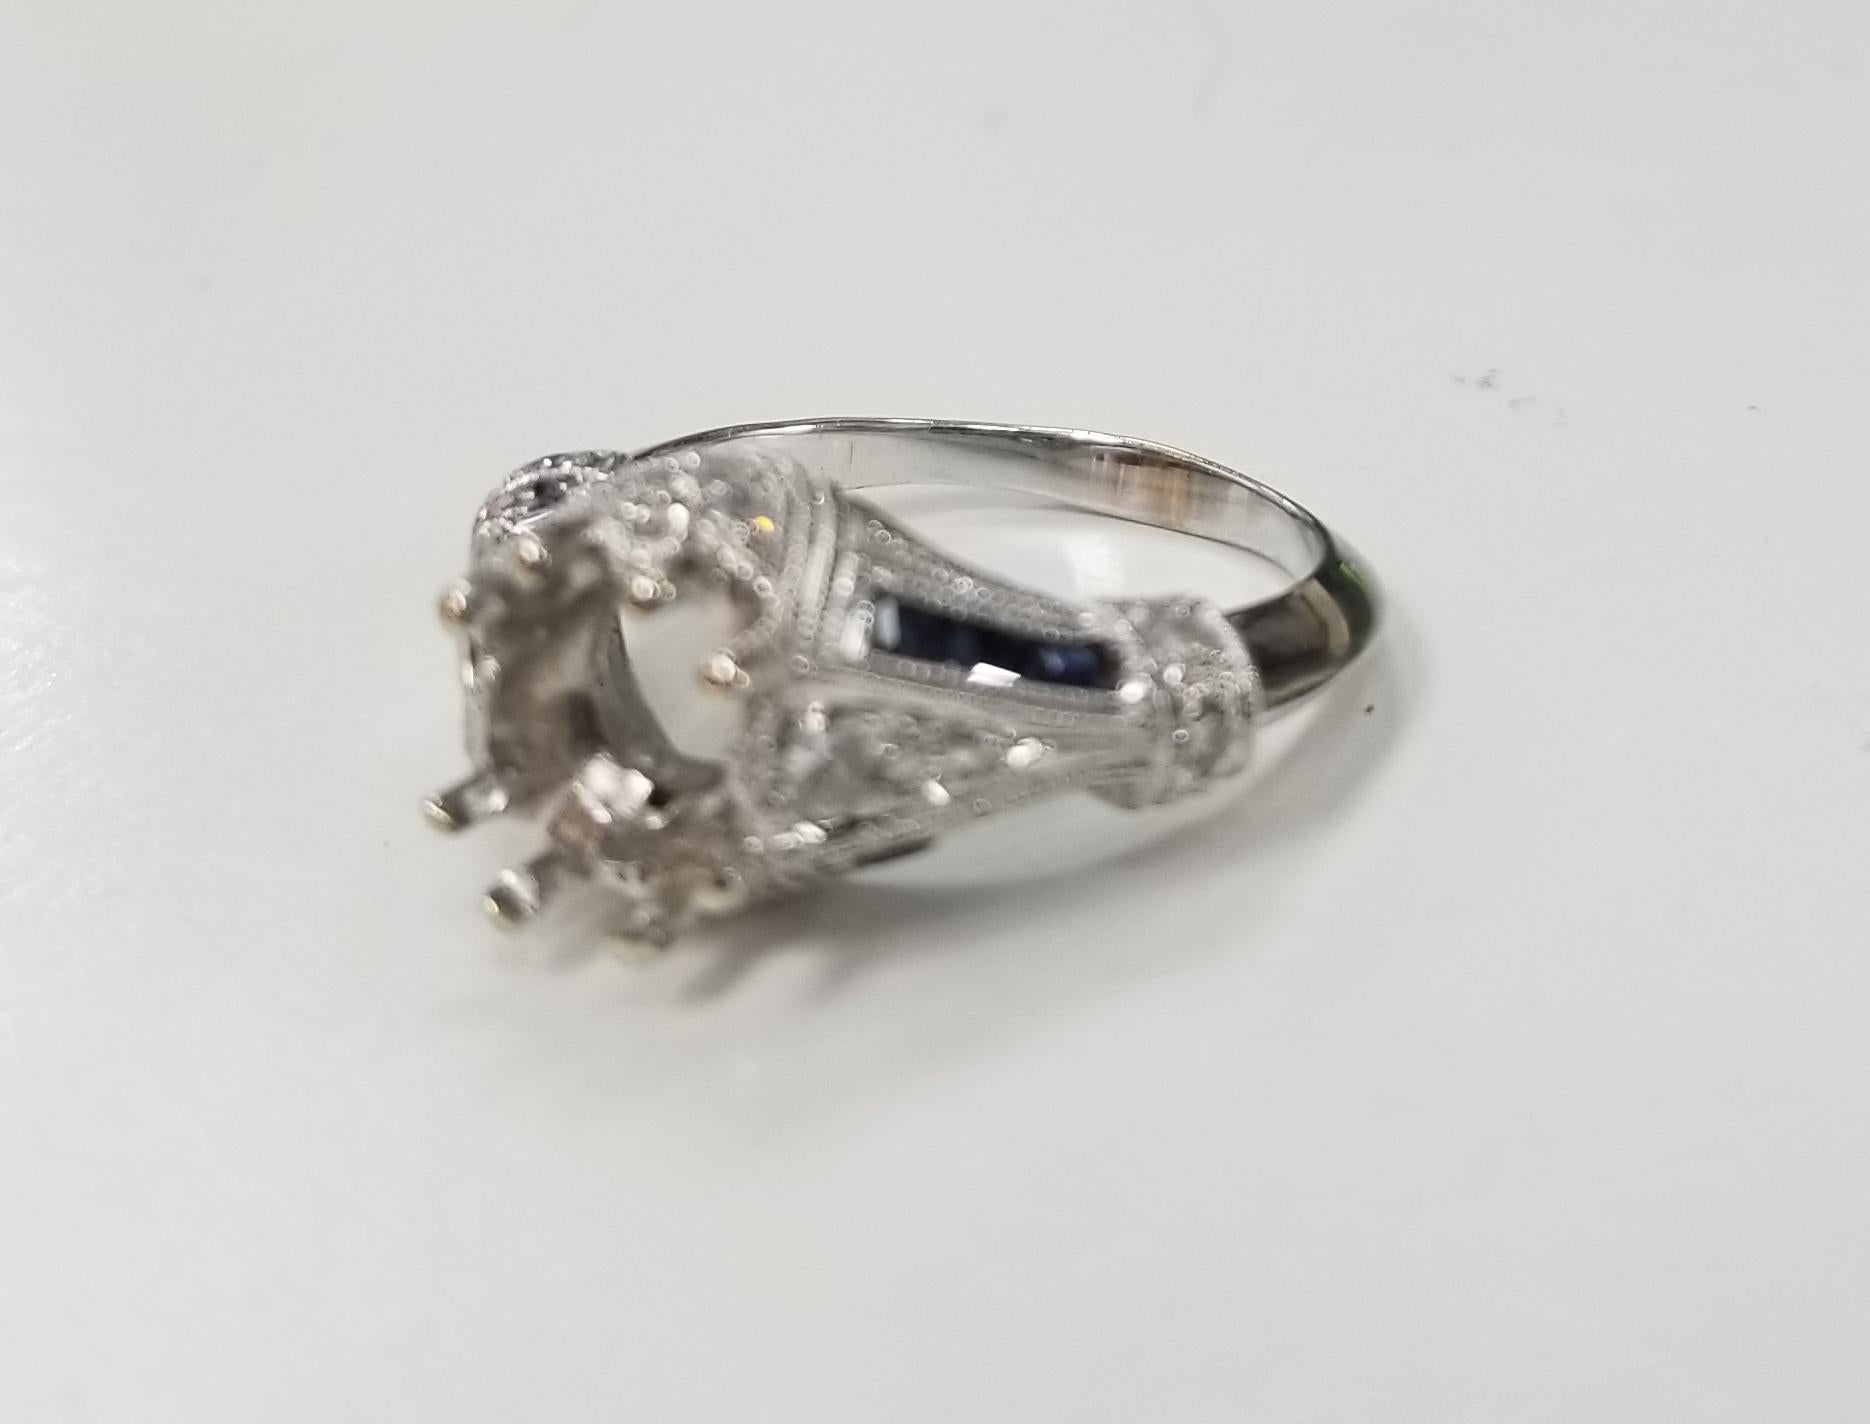 Art Deco inspired 14k white gold with diamonds-sapphires, containing  diamonds-sapphires weighing diamonds round .40pts. and sapphires square cut .60pts.  the ring is a size 6.5 and can be sized to fit for free. the ring can take 7.5mm to 8mm stone.